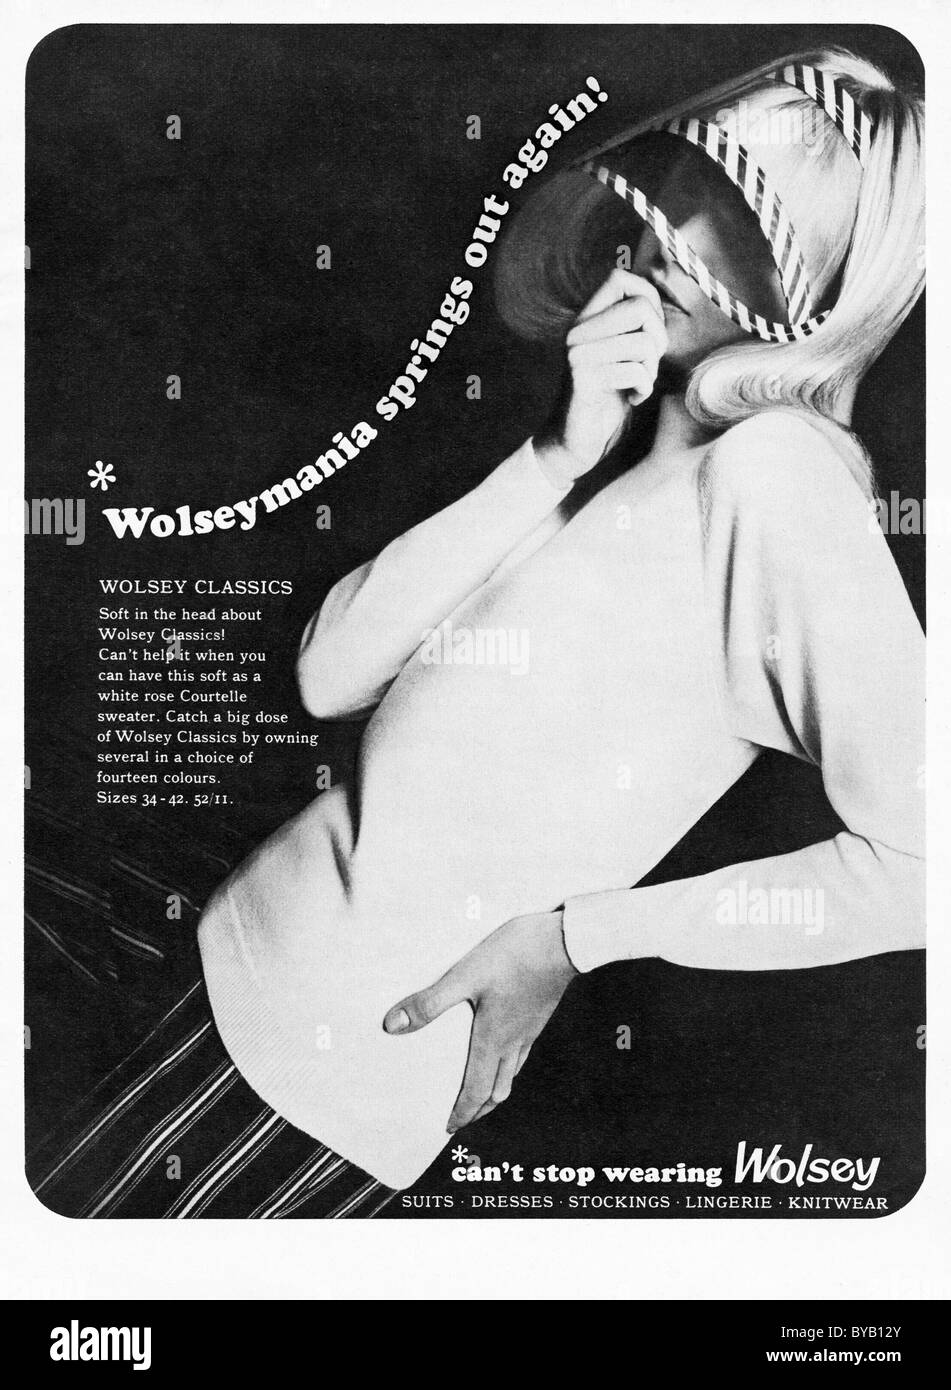 1960s advertisement in women's fashion magazine for WOLSEY classic COURTELLE sweater Stock Photo